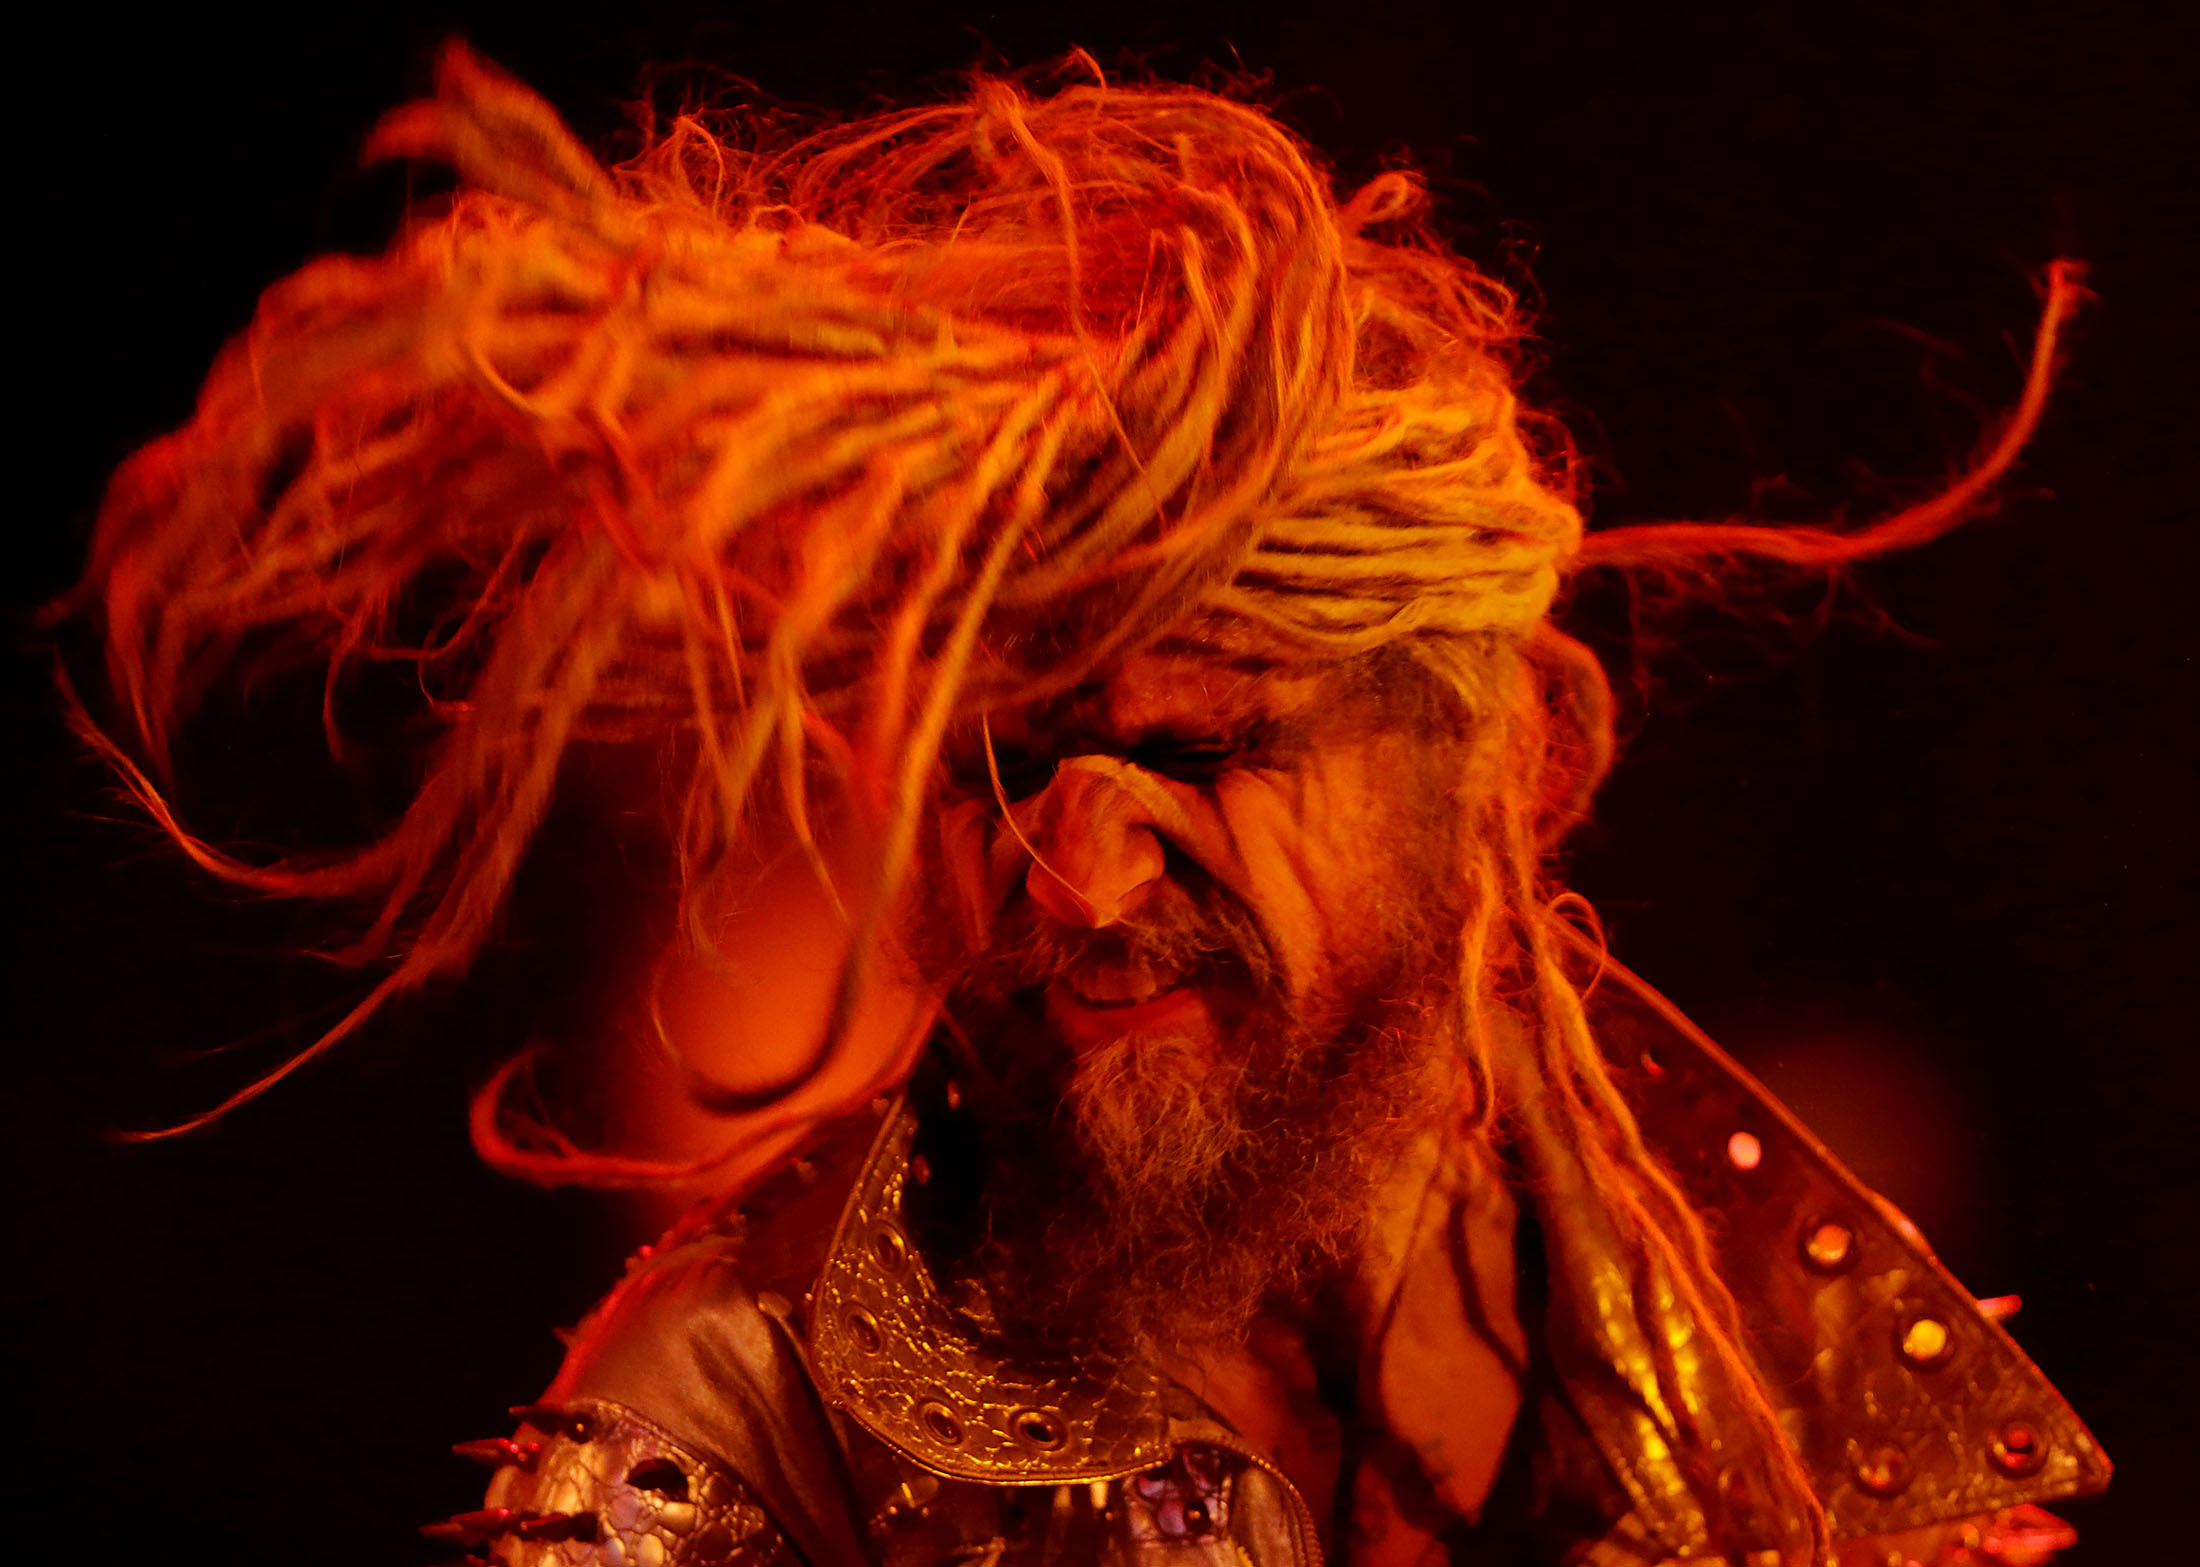  Rob Zombie performs during day two of Ozzfest Meets Knotfest at Glen Helen Amphitheater Sunday in Devore, CA. November 5, 2017. 
 